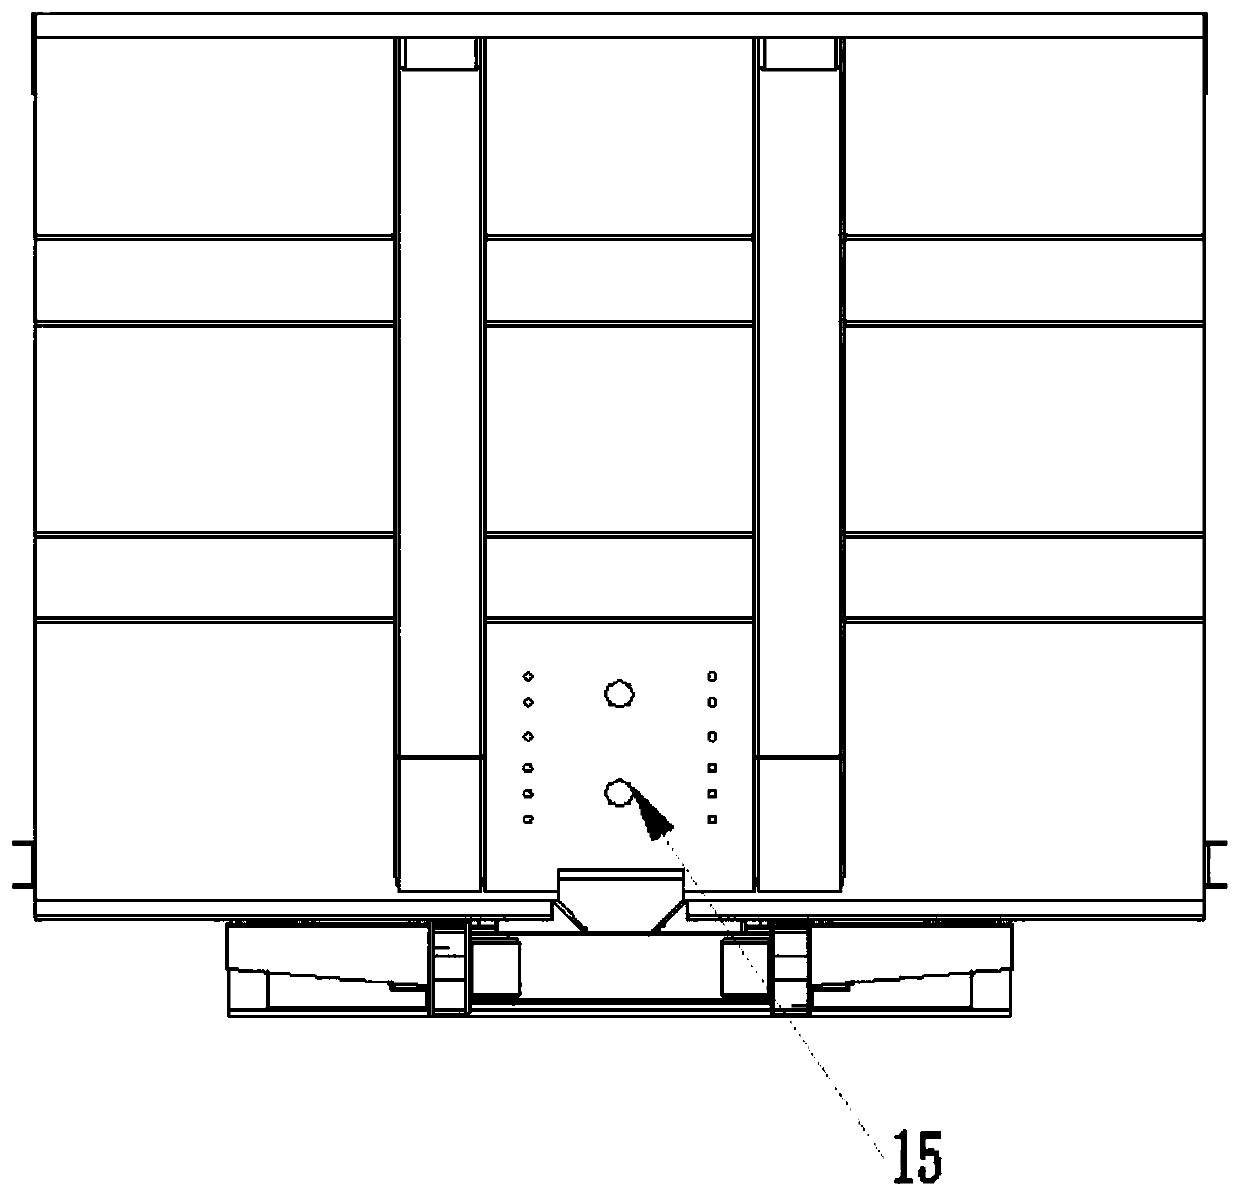 A high-efficiency transfer container